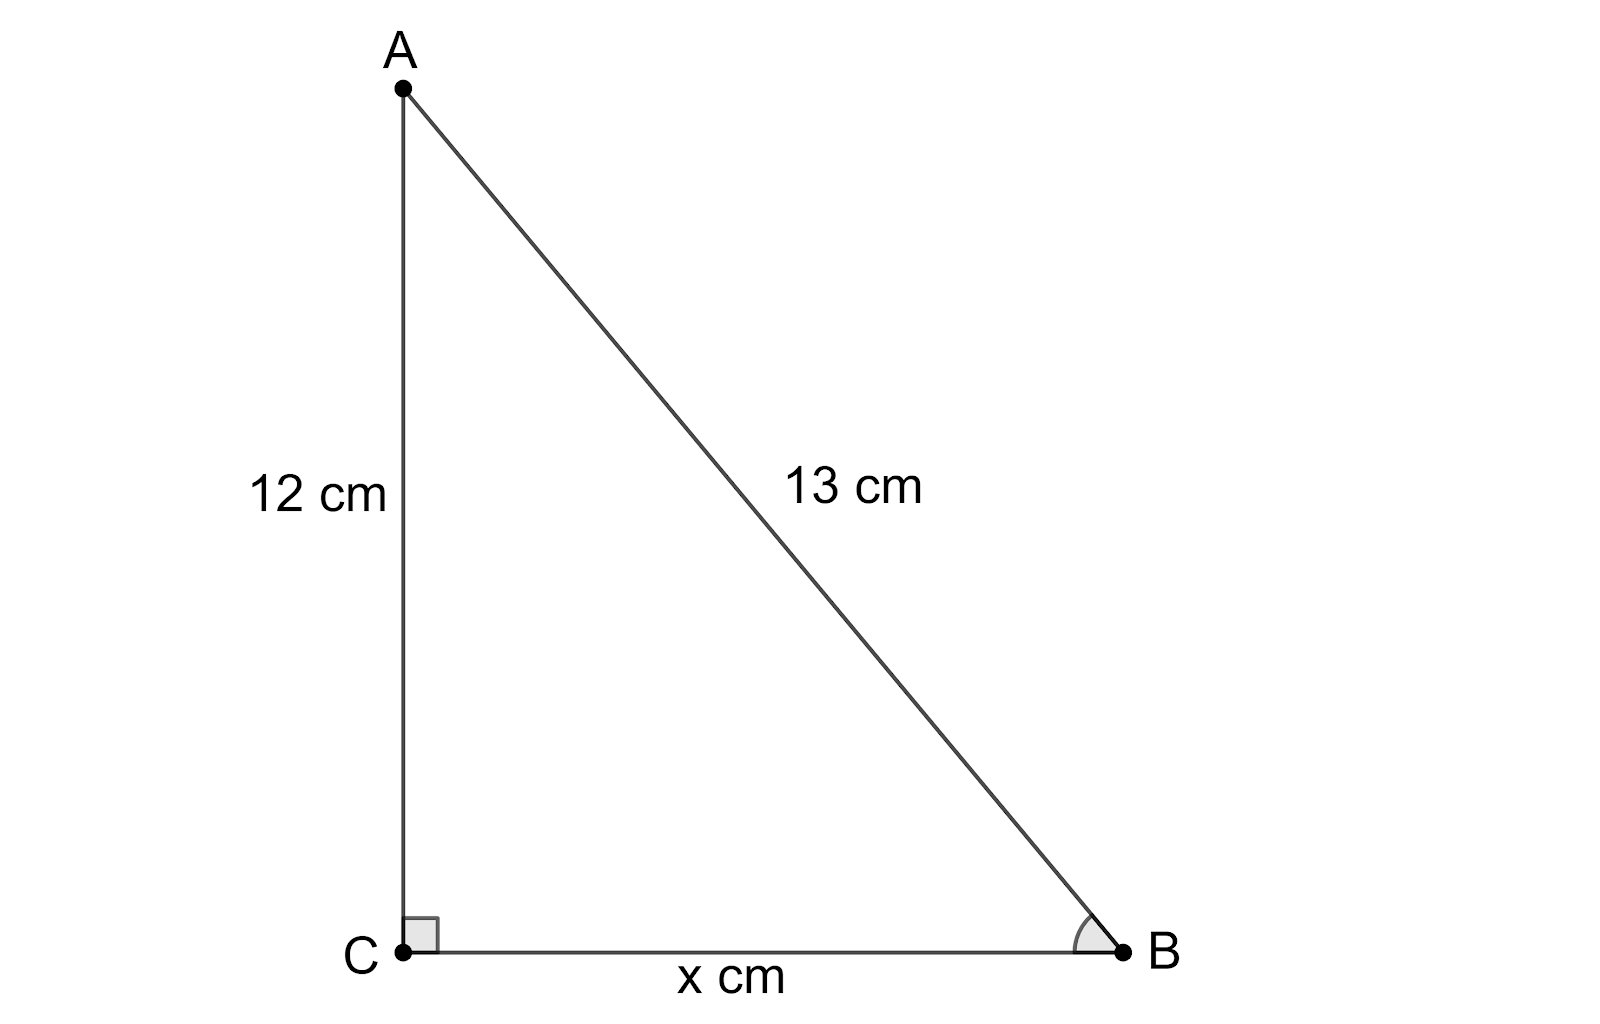 If The Lengths Of The Sides Of A Right Angle Triangle Are Given As Cm X Cm And Cm As